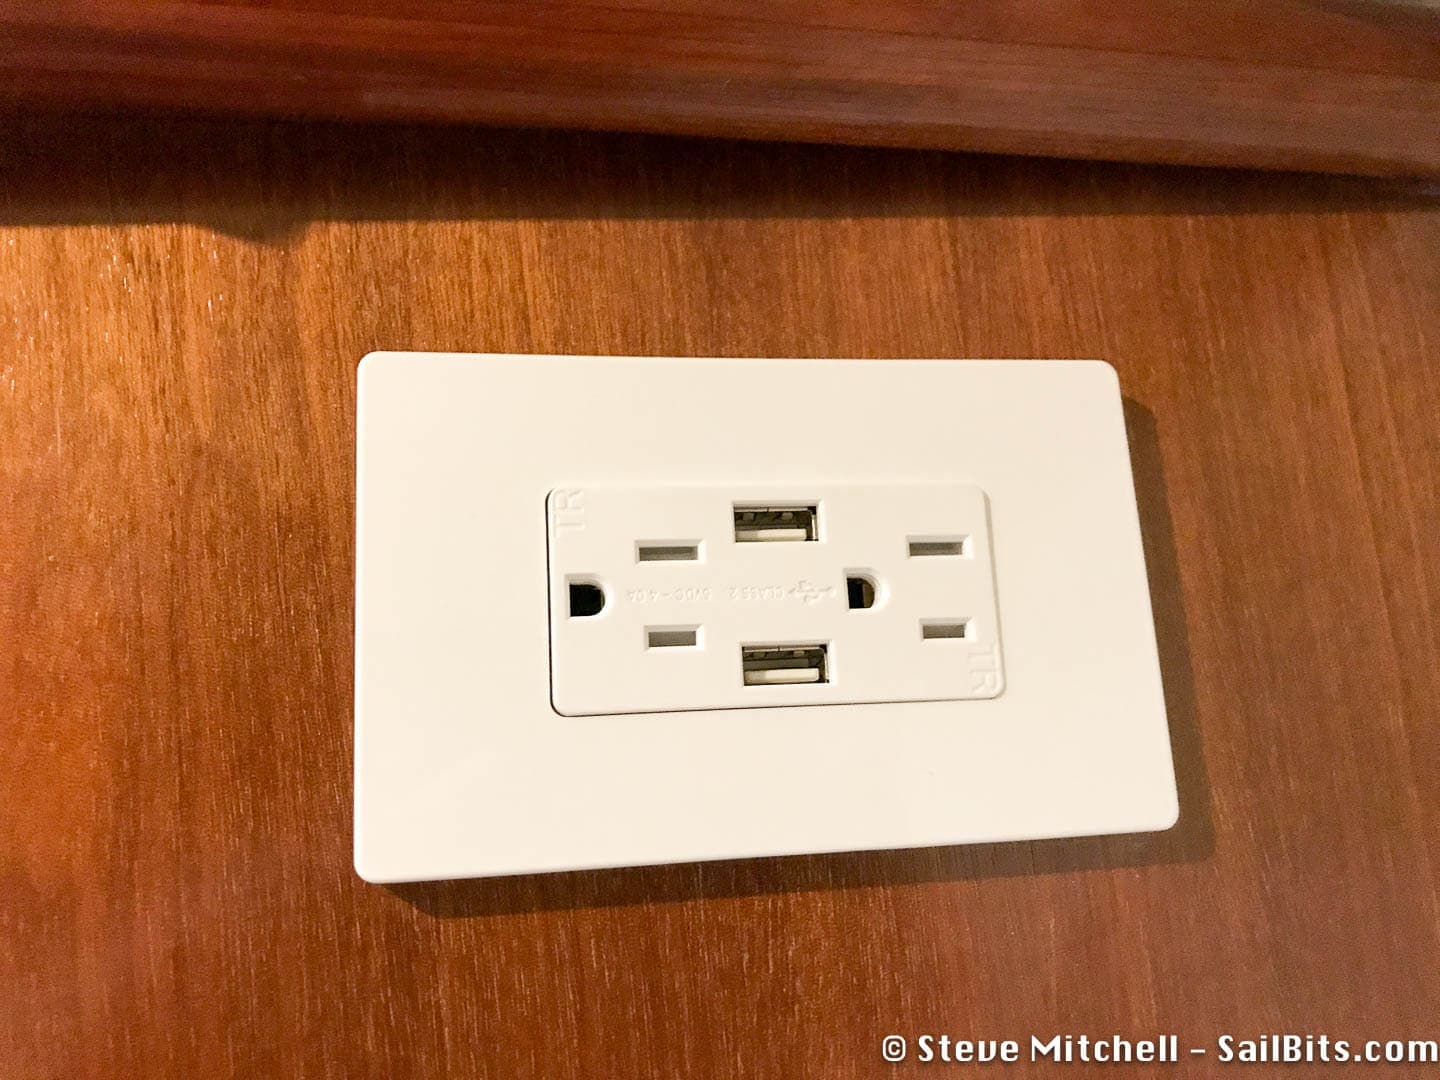 Topgreener AC outlets + USB